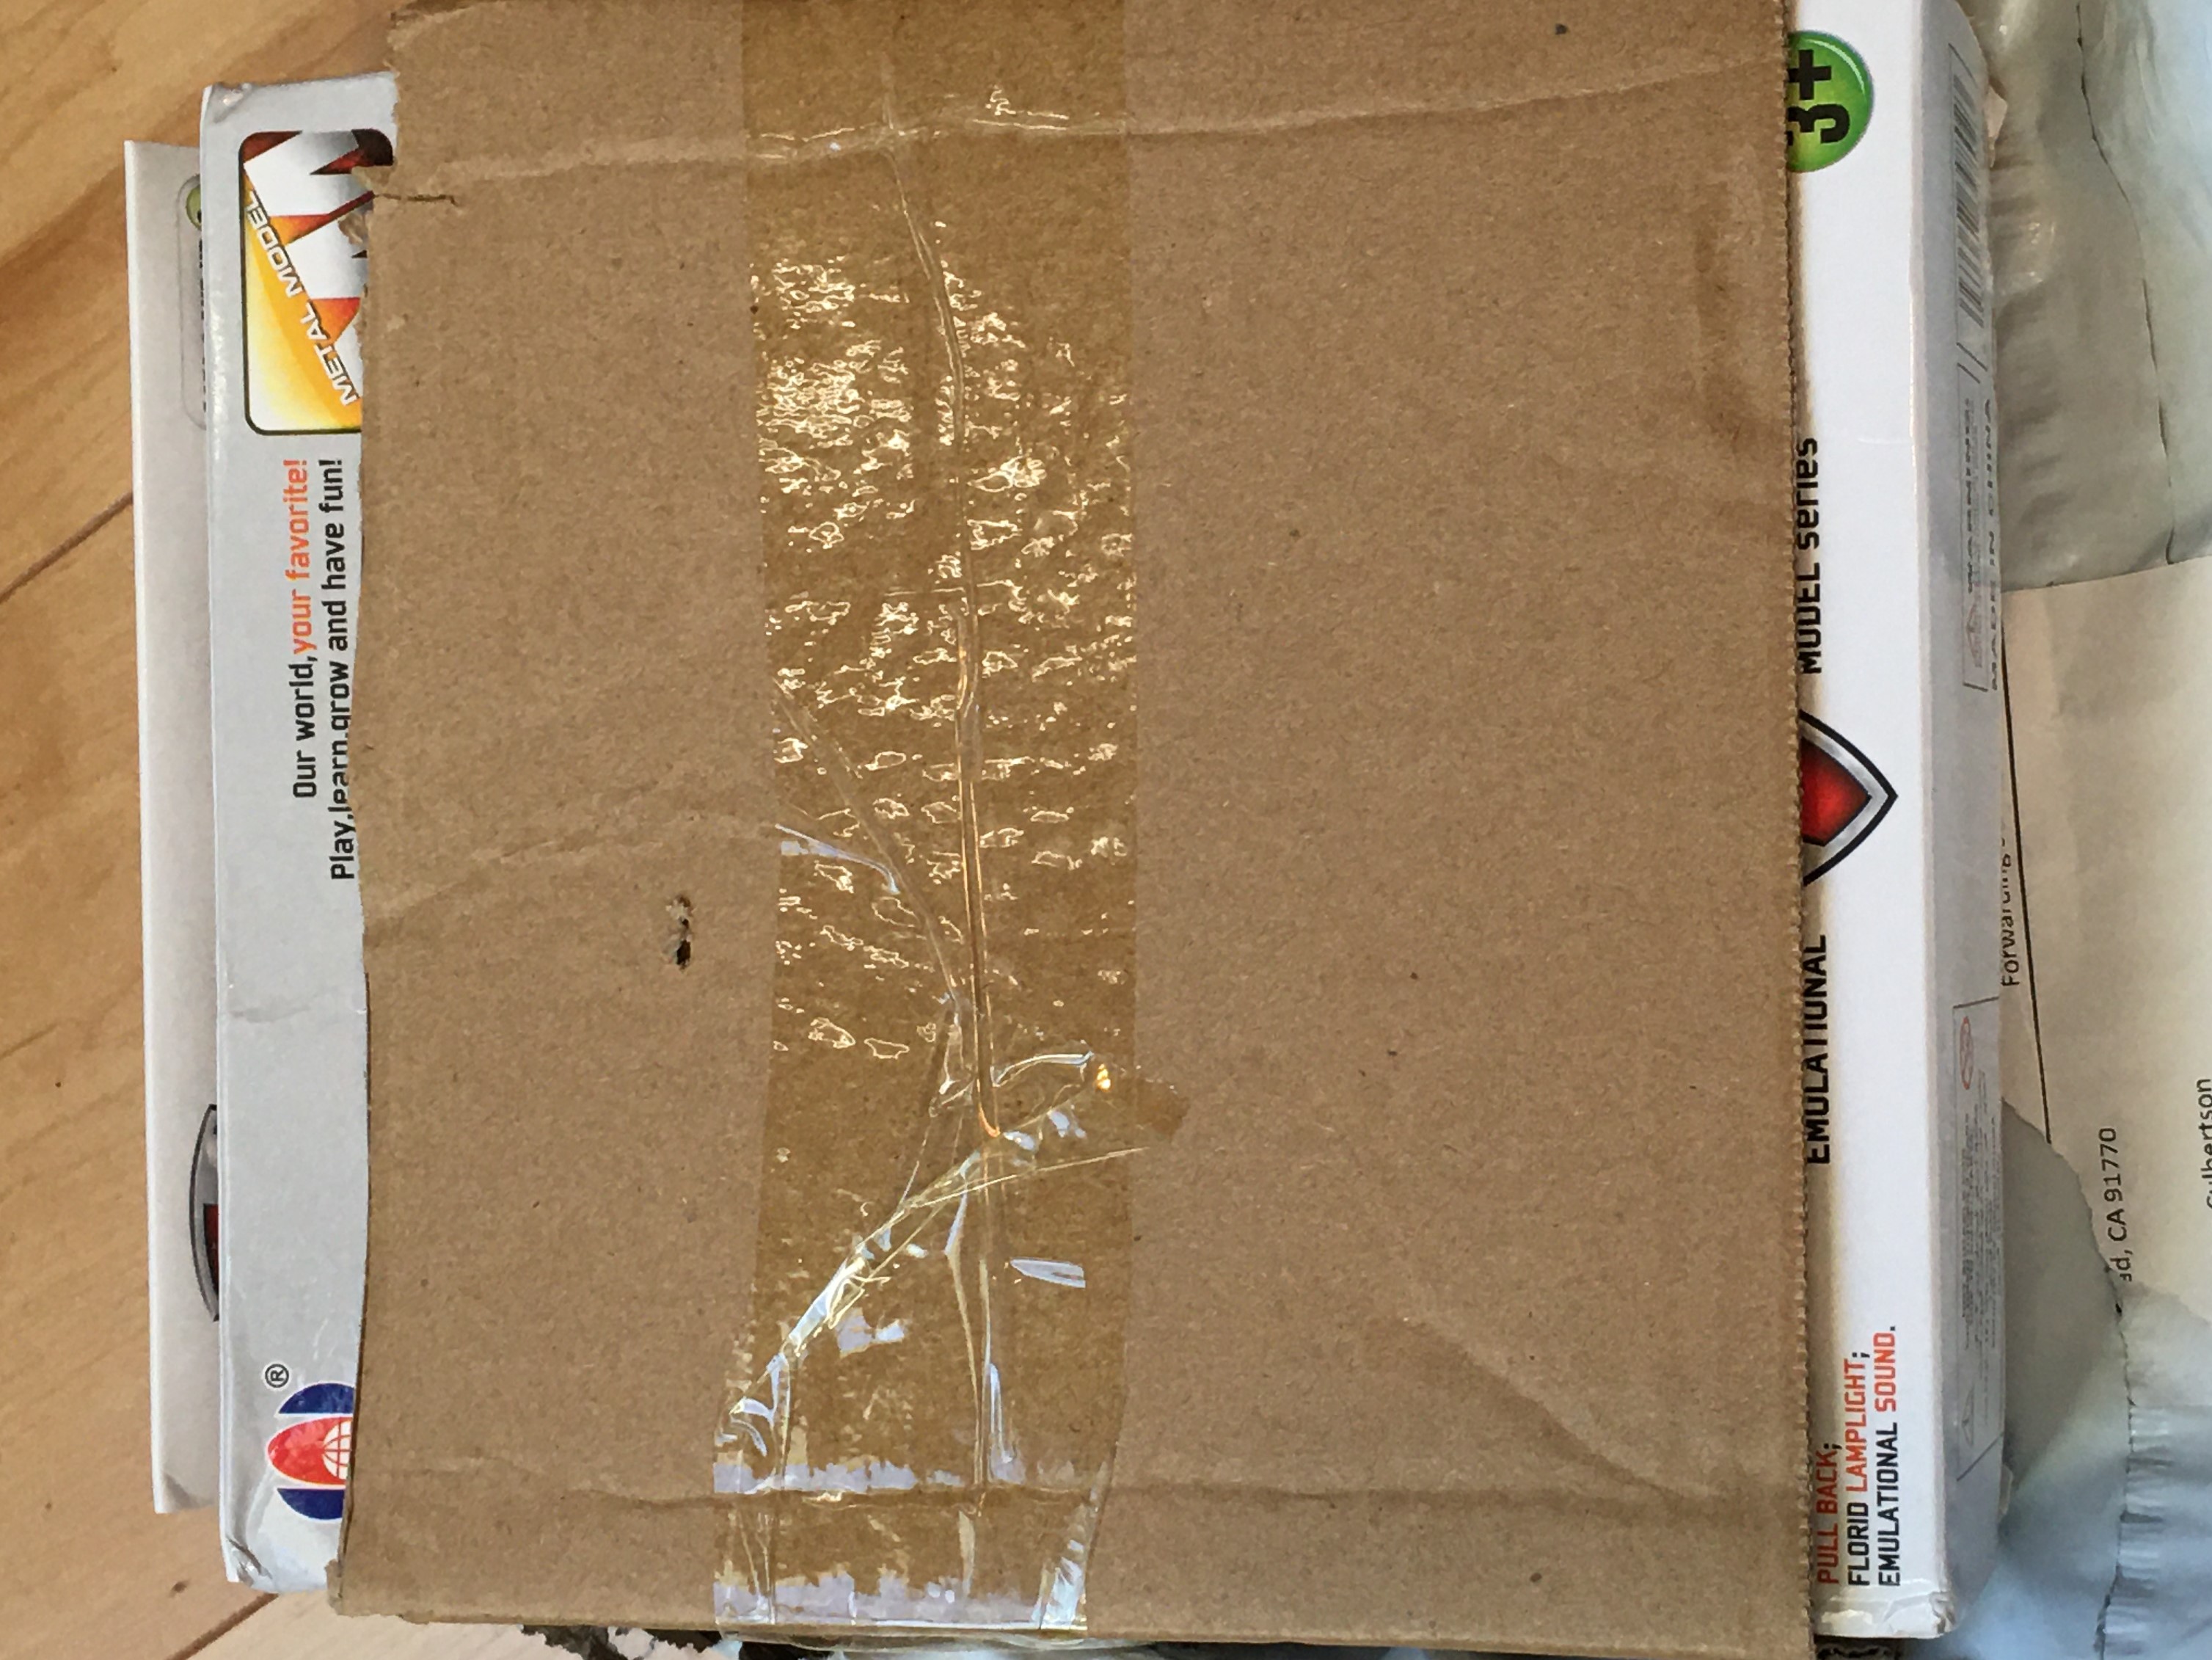 cardboard covering the front of toy airplane